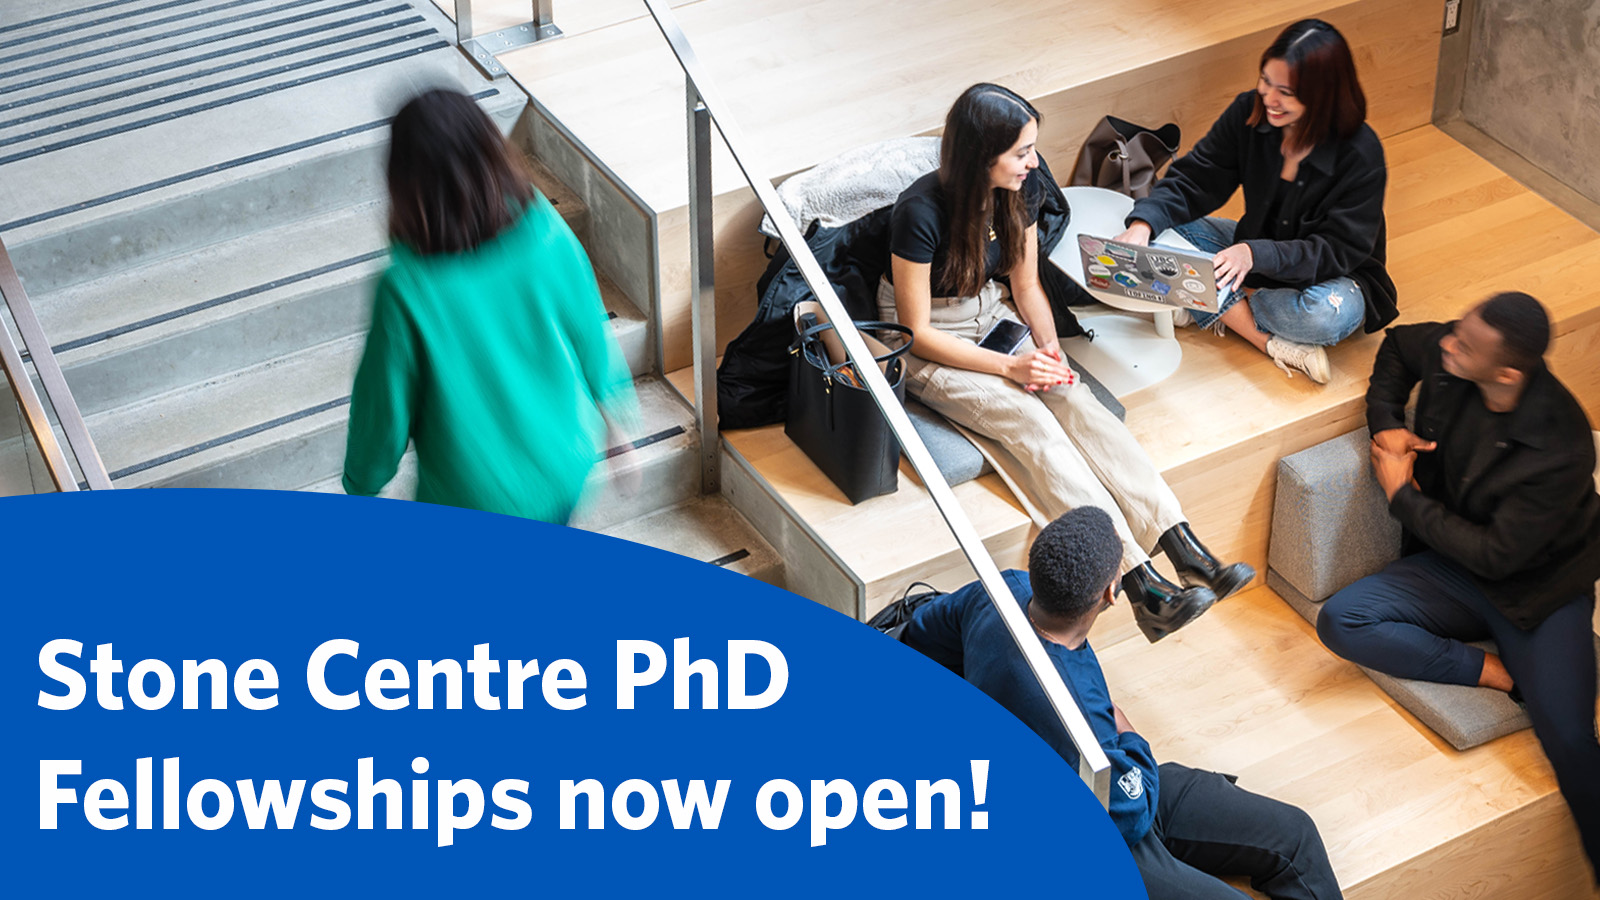 Announcing the Launch of the Stone Centre’s PhD Fellowship Program